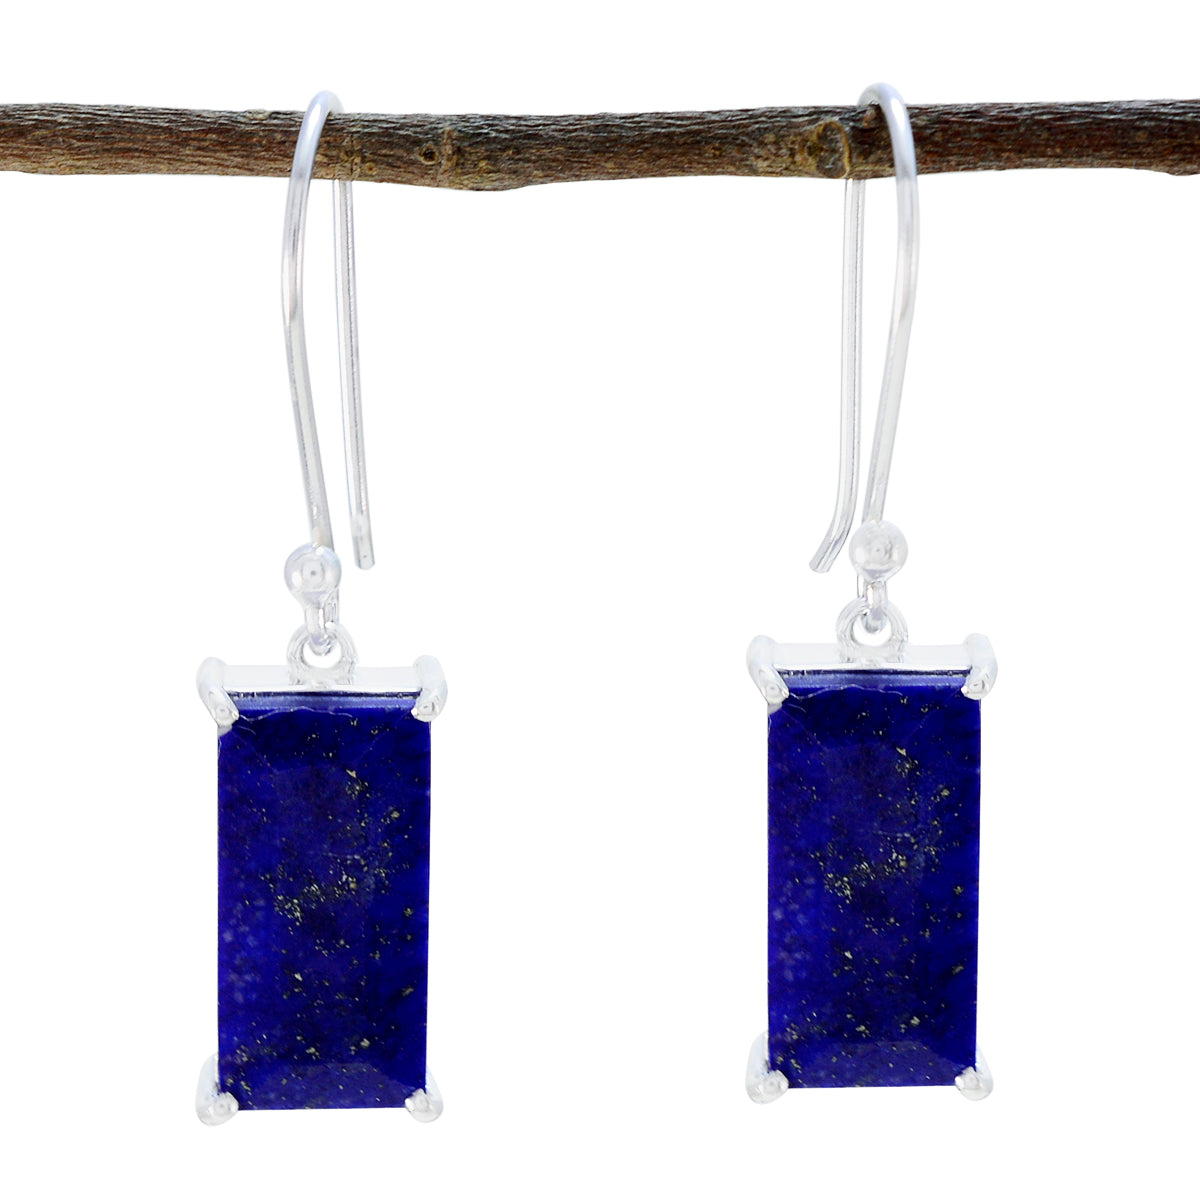 Riyo Natural Gemstone Octogon Faceted Nevy Blue Lapis Lazuli Silver Earring gift for wife